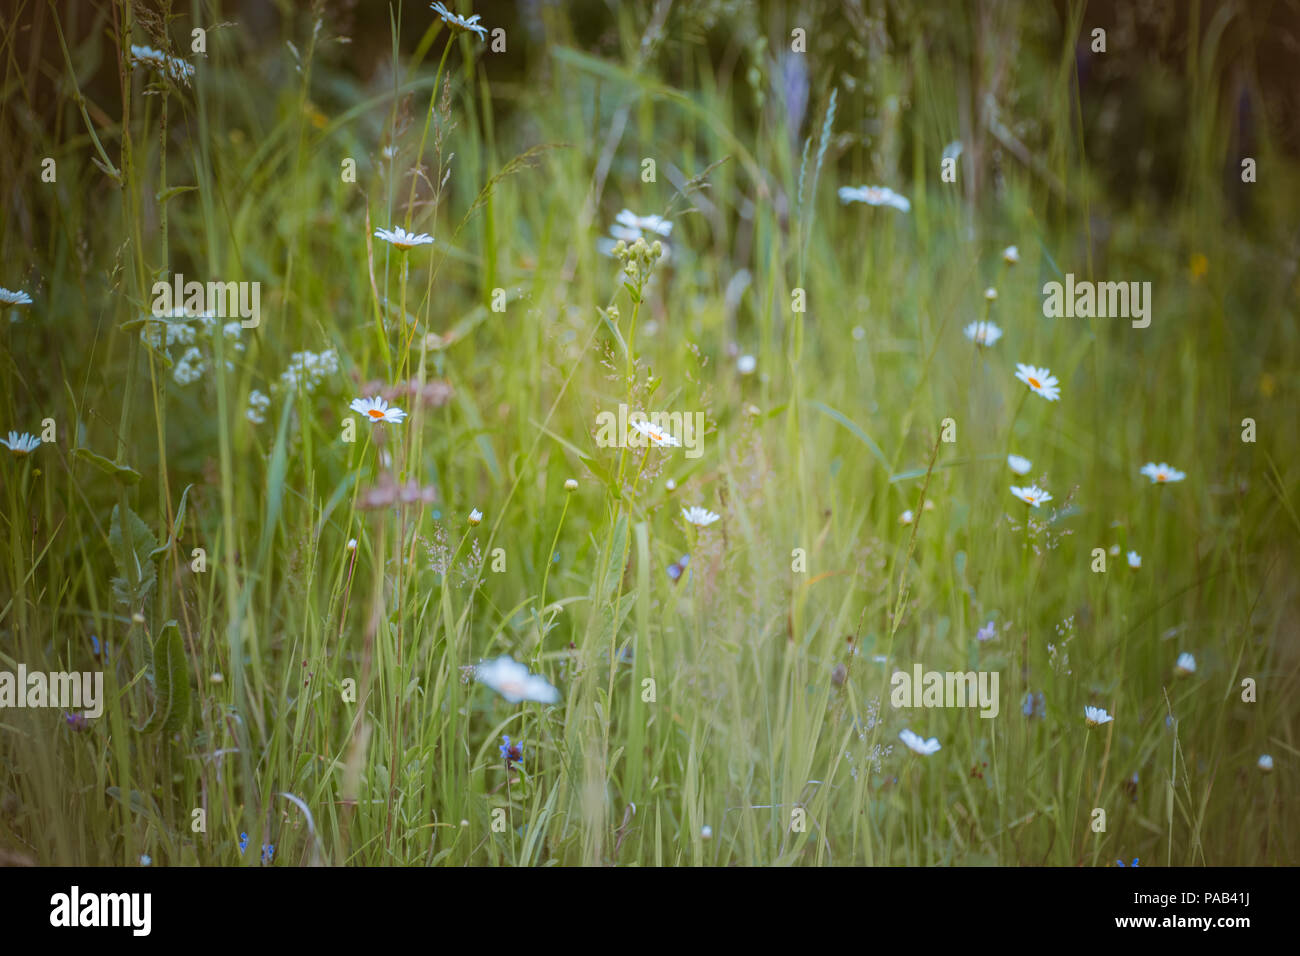 Wild white daisies in a field in summer Stock Photo